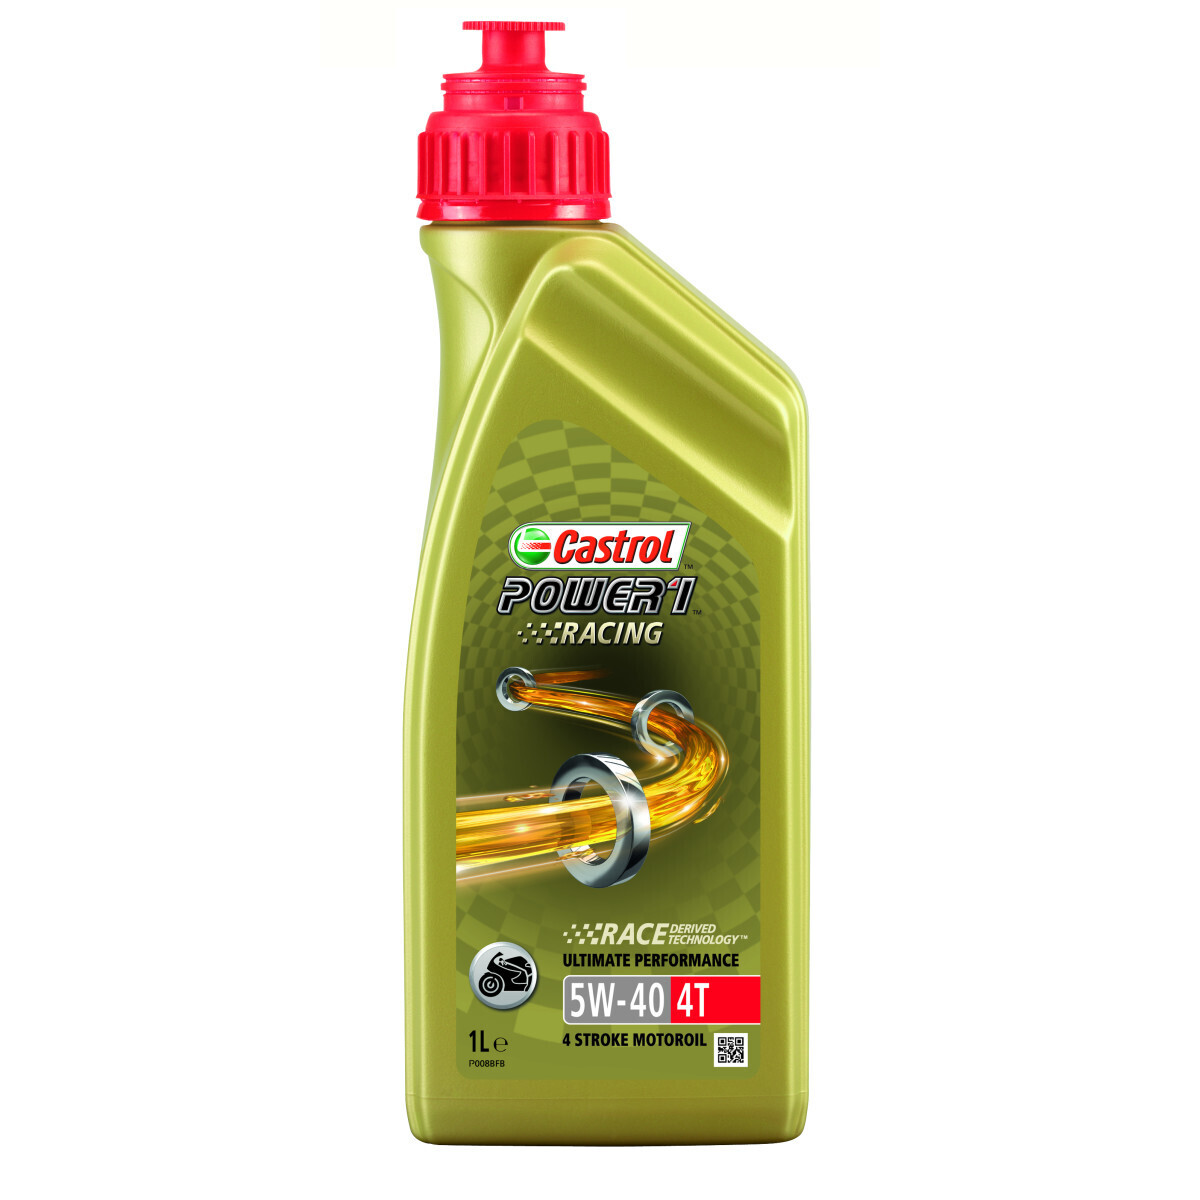 CASTROL
POWER 1 RACING 4-STROKE SAE 5W40 PARTLY SYNTHETIC 1 LITER